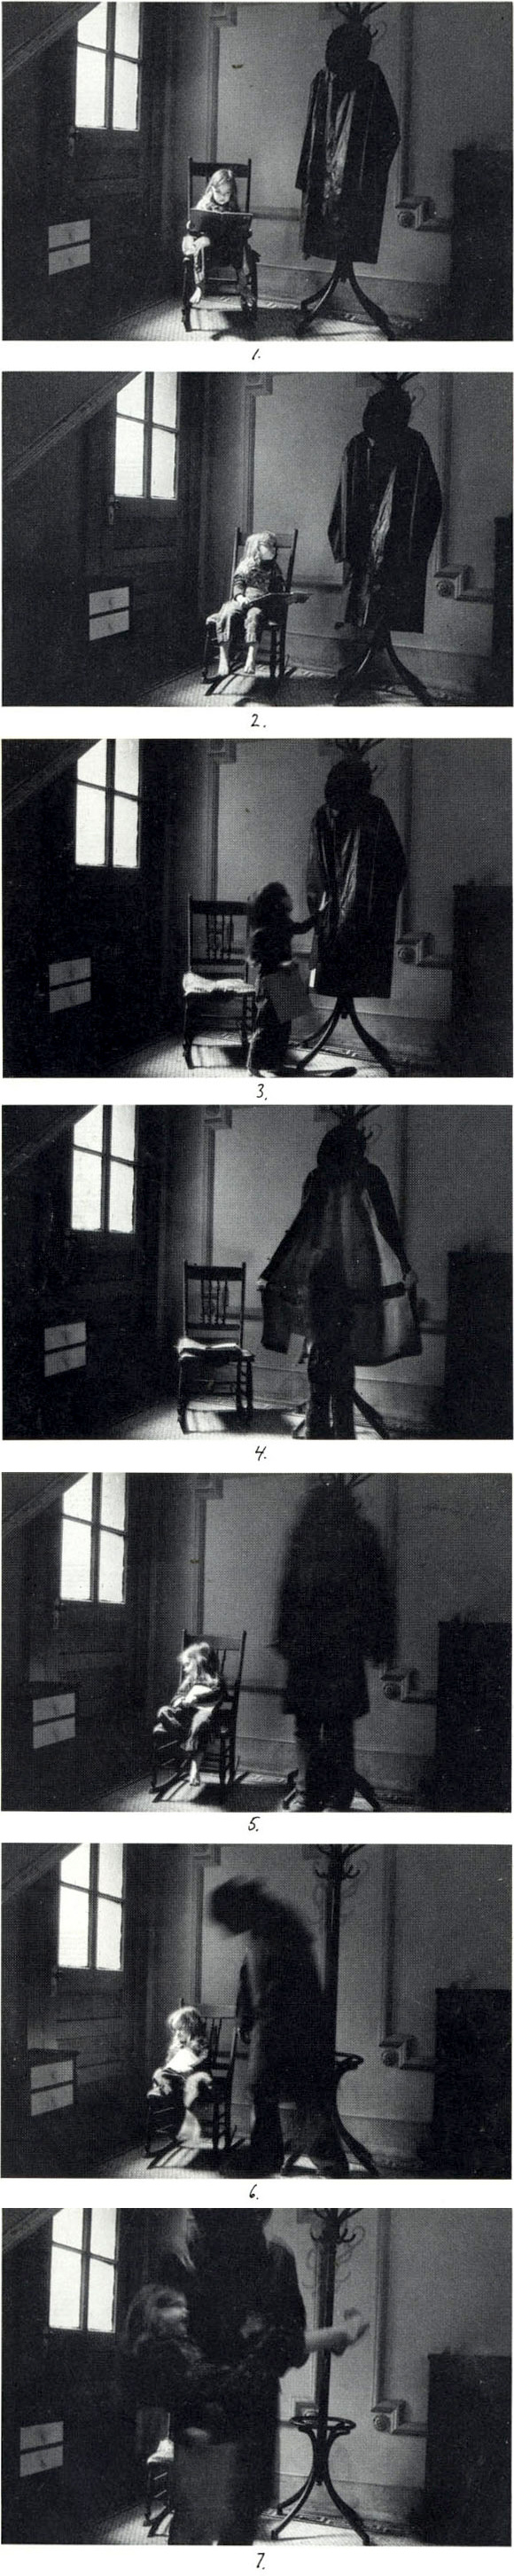 sequence photographie duane mickeals 03 Les séquences photographiques de Duane Michals  photo art 